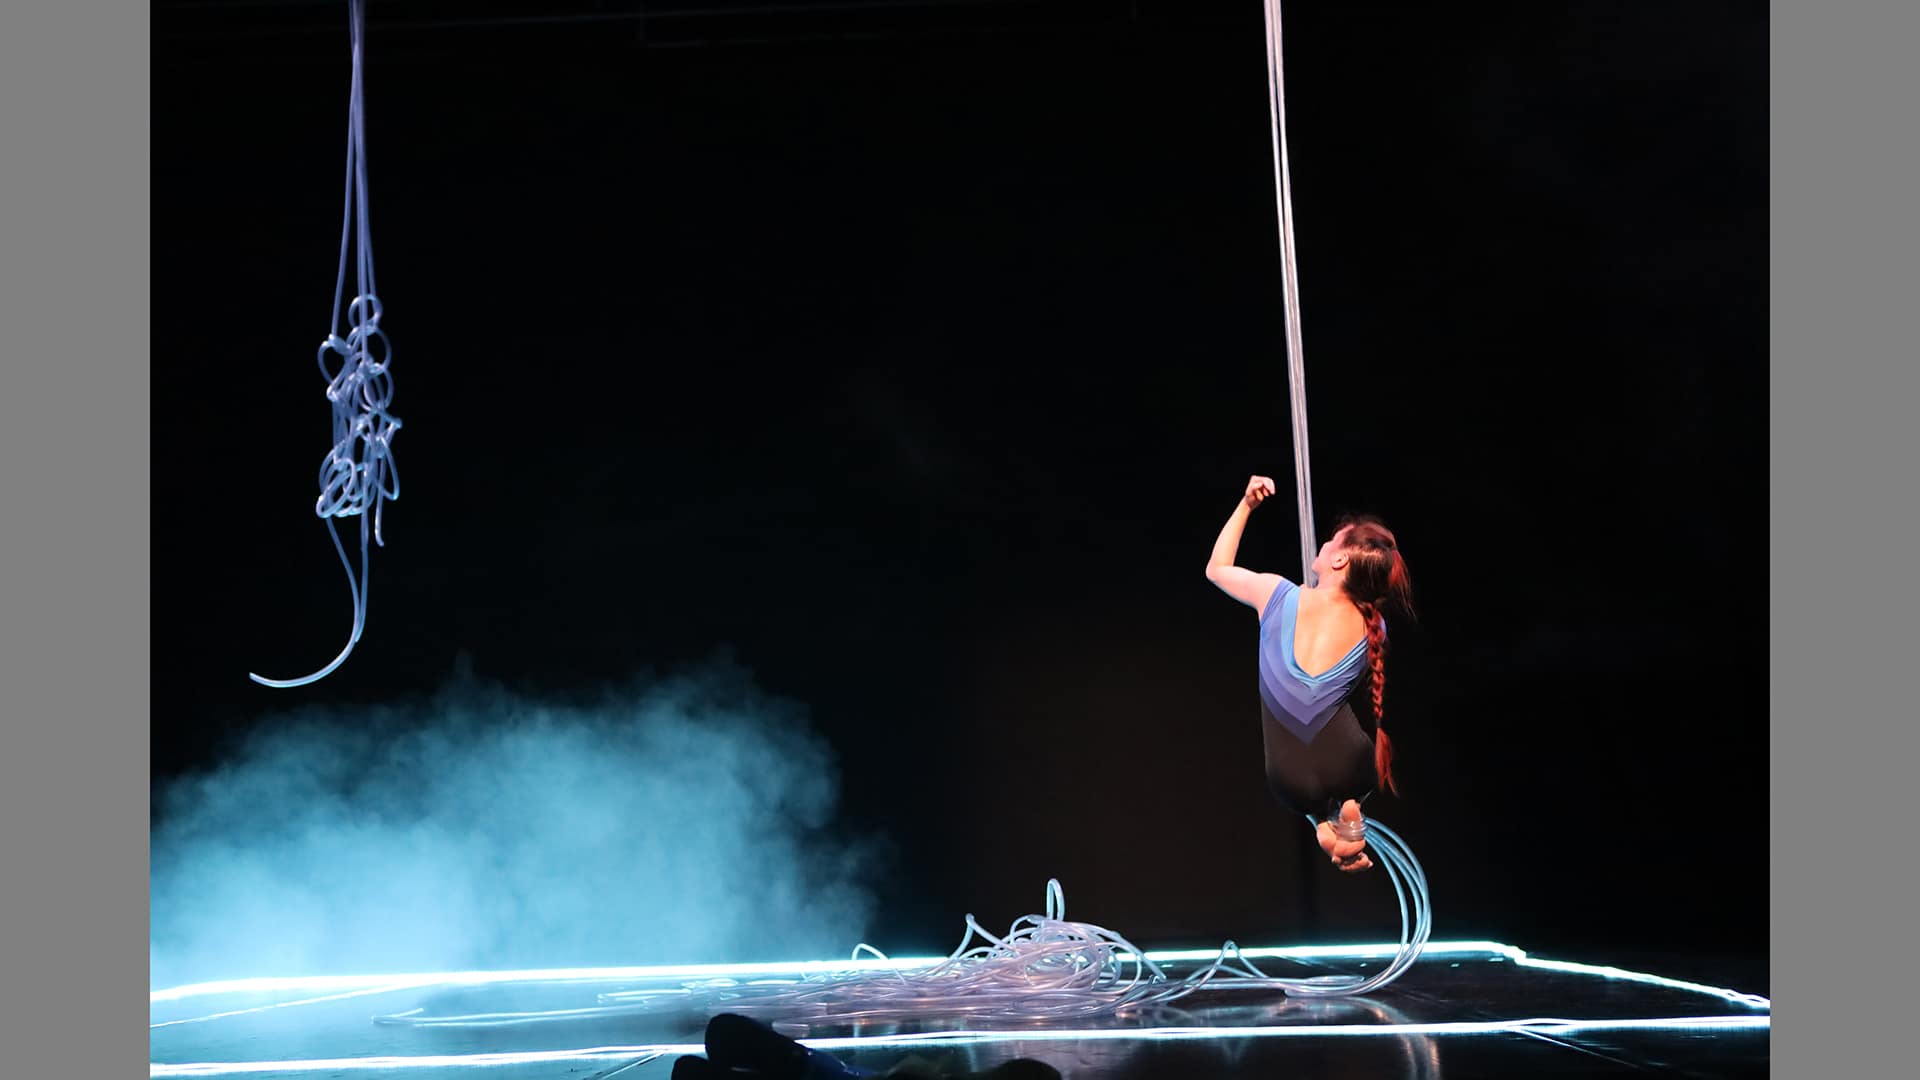 A performer swings around the stage, her back to the camera, her feet tucked up under her, using plastic tubing as a rope. Her long red hair is tied back in a plait